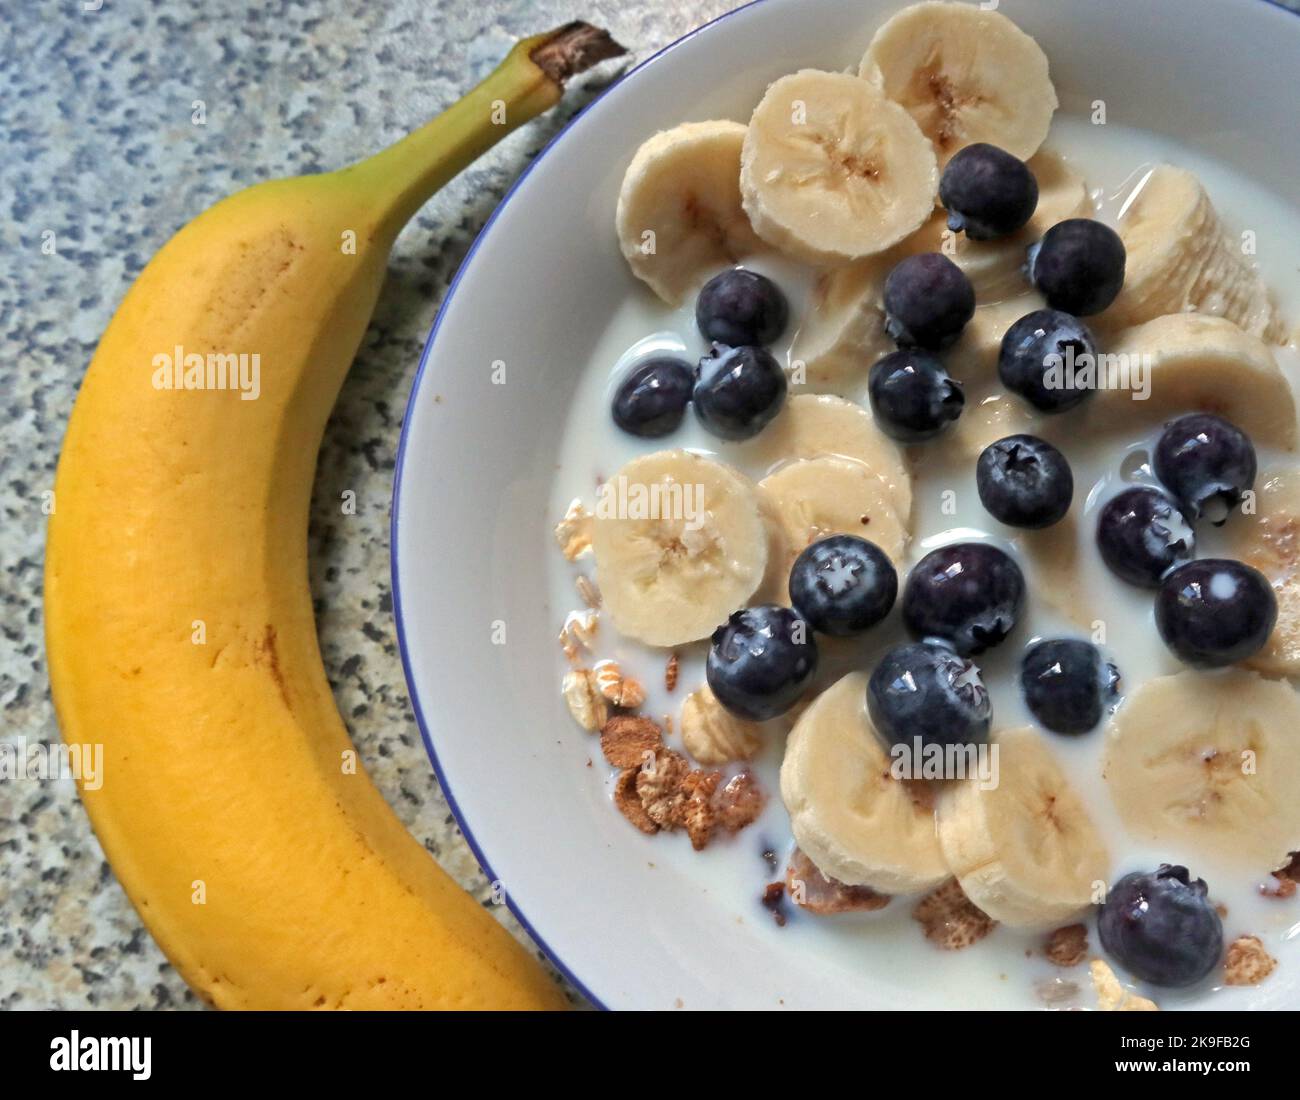 Healthy breakfast cereal with banana, blueberries Stock Photo